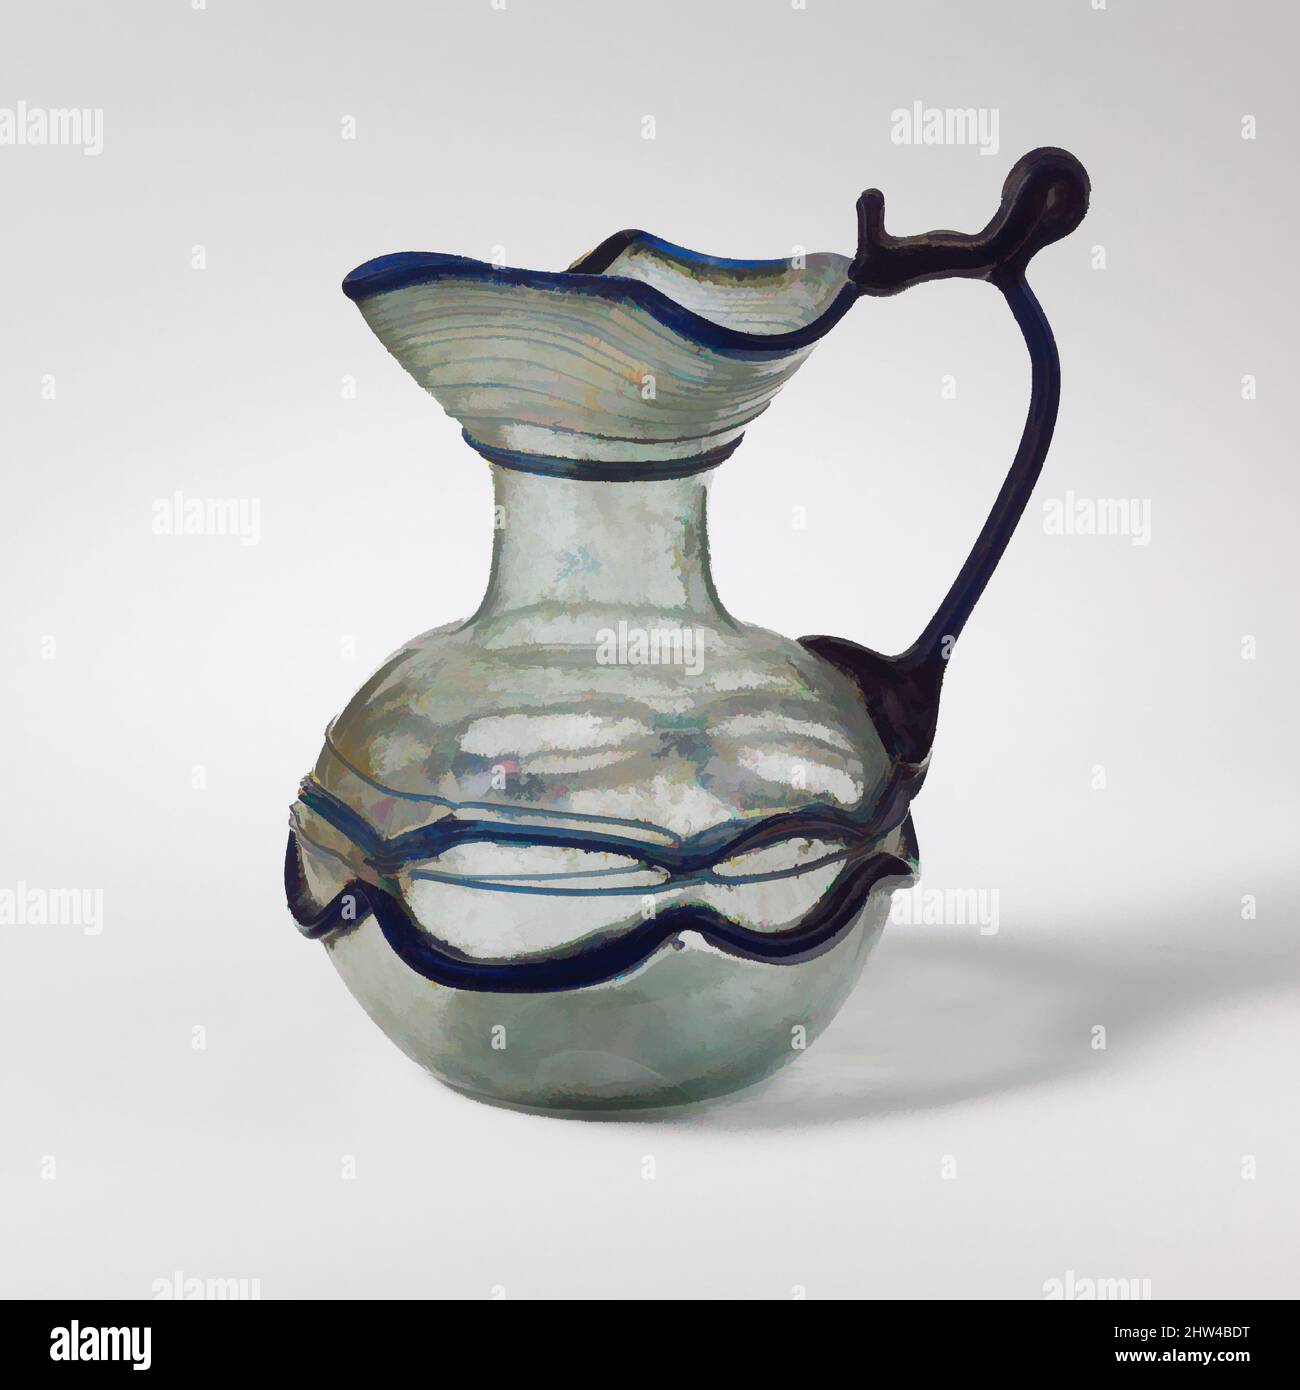 Art inspired by Glass jug with trefoil rim, Late Imperial or Early Byzantine, 5th–6th century A.D. or later, Roman, Syrian, Glass; blown, trailed, and tooled, H.: 4 3/16 in. (10.7 cm), Glass, Translucent blue green; handle and trails in translucent cobalt blue., Trefoil rim with, Classic works modernized by Artotop with a splash of modernity. Shapes, color and value, eye-catching visual impact on art. Emotions through freedom of artworks in a contemporary way. A timeless message pursuing a wildly creative new direction. Artists turning to the digital medium and creating the Artotop NFT Stock Photo